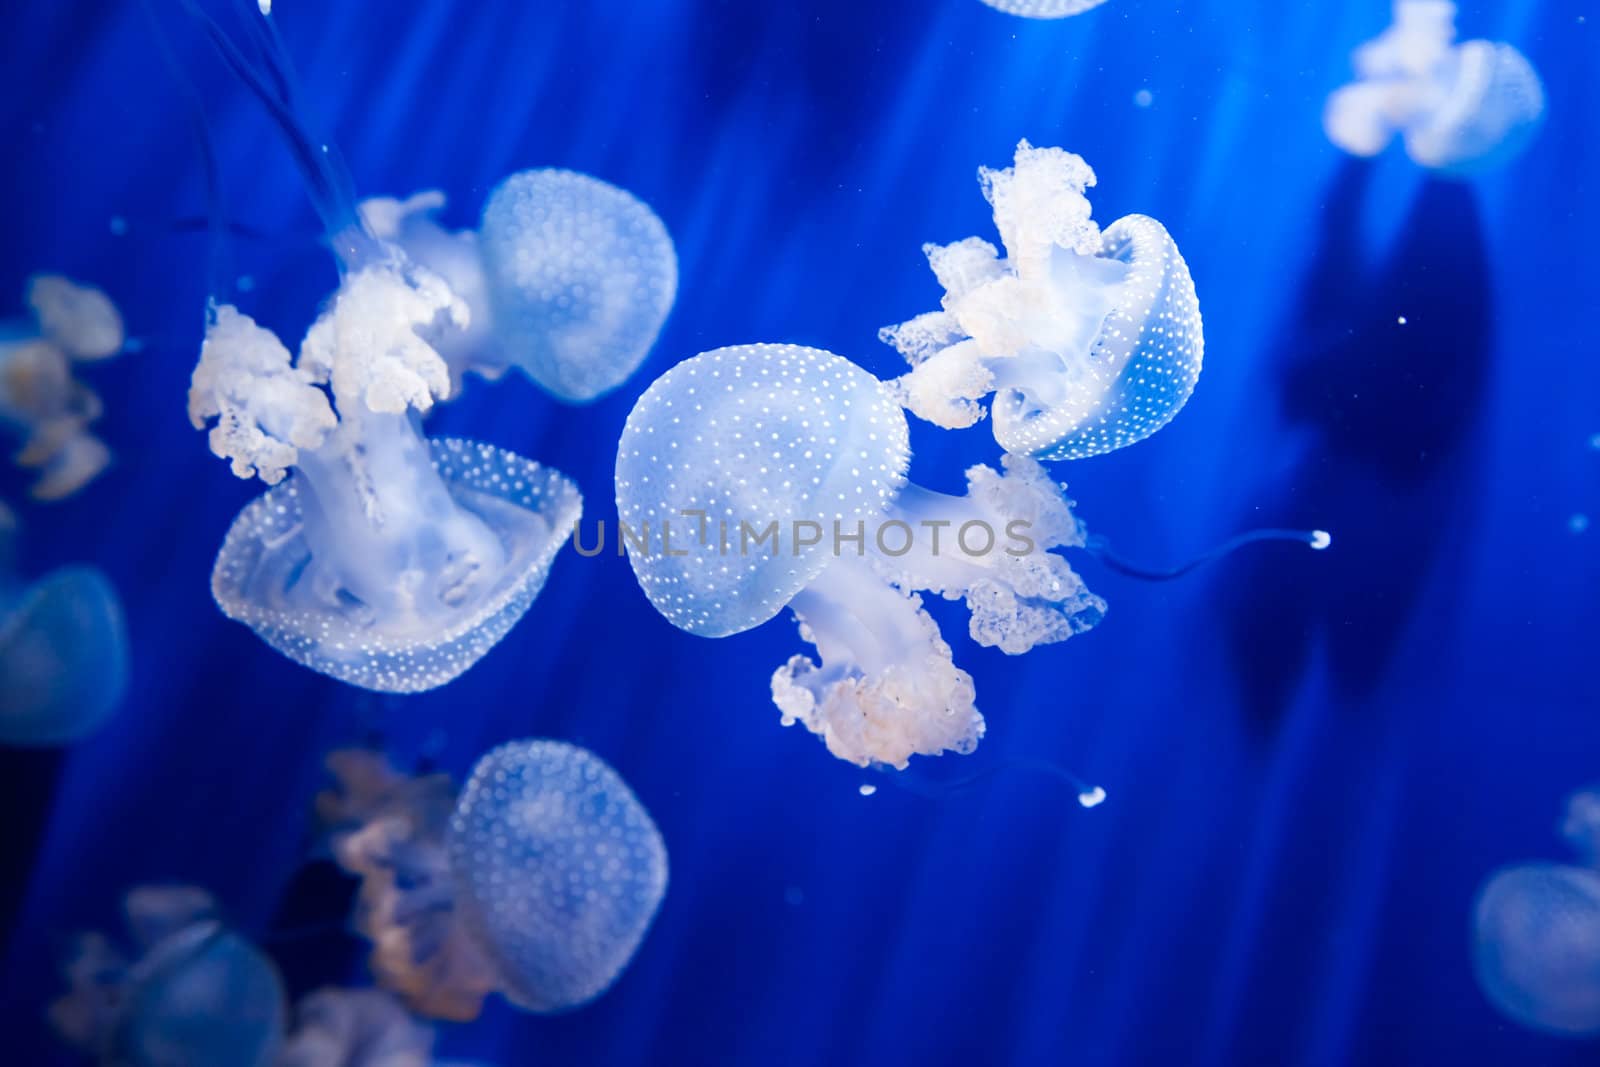 Jellyfish in an aquarium with blue water  by fambros